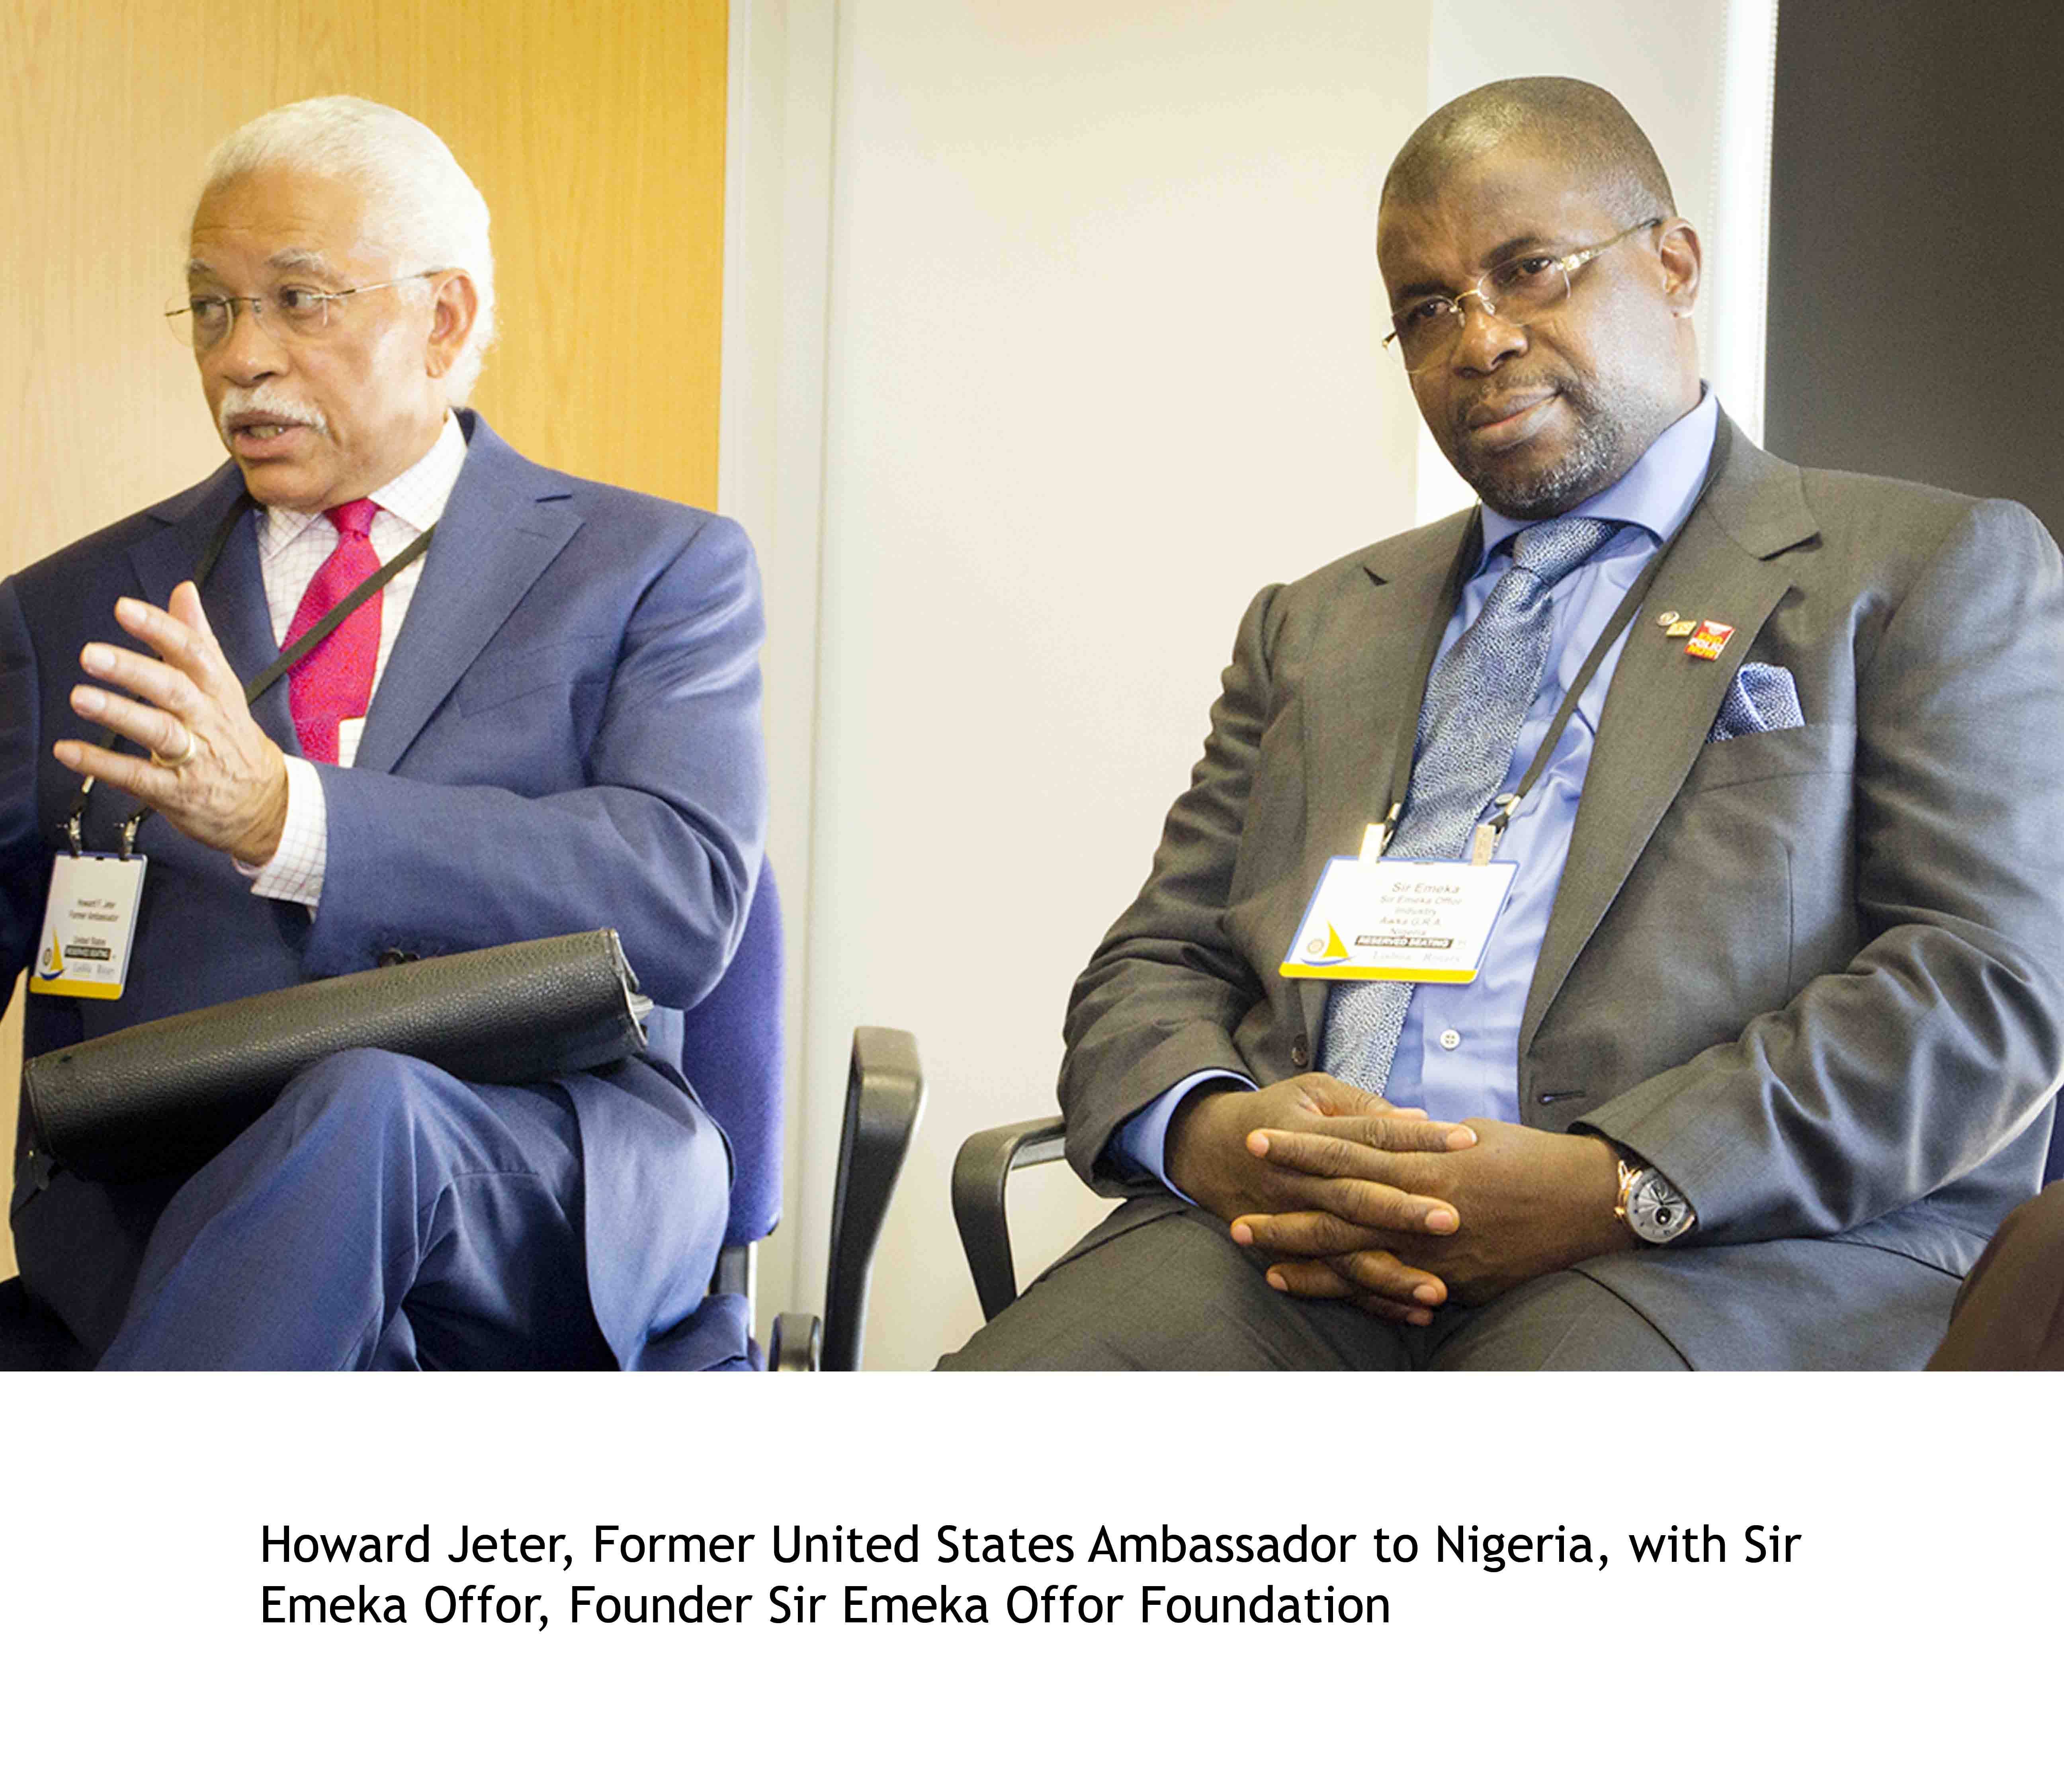 Sir Emeka Offor at Annual Convention of Rotary International